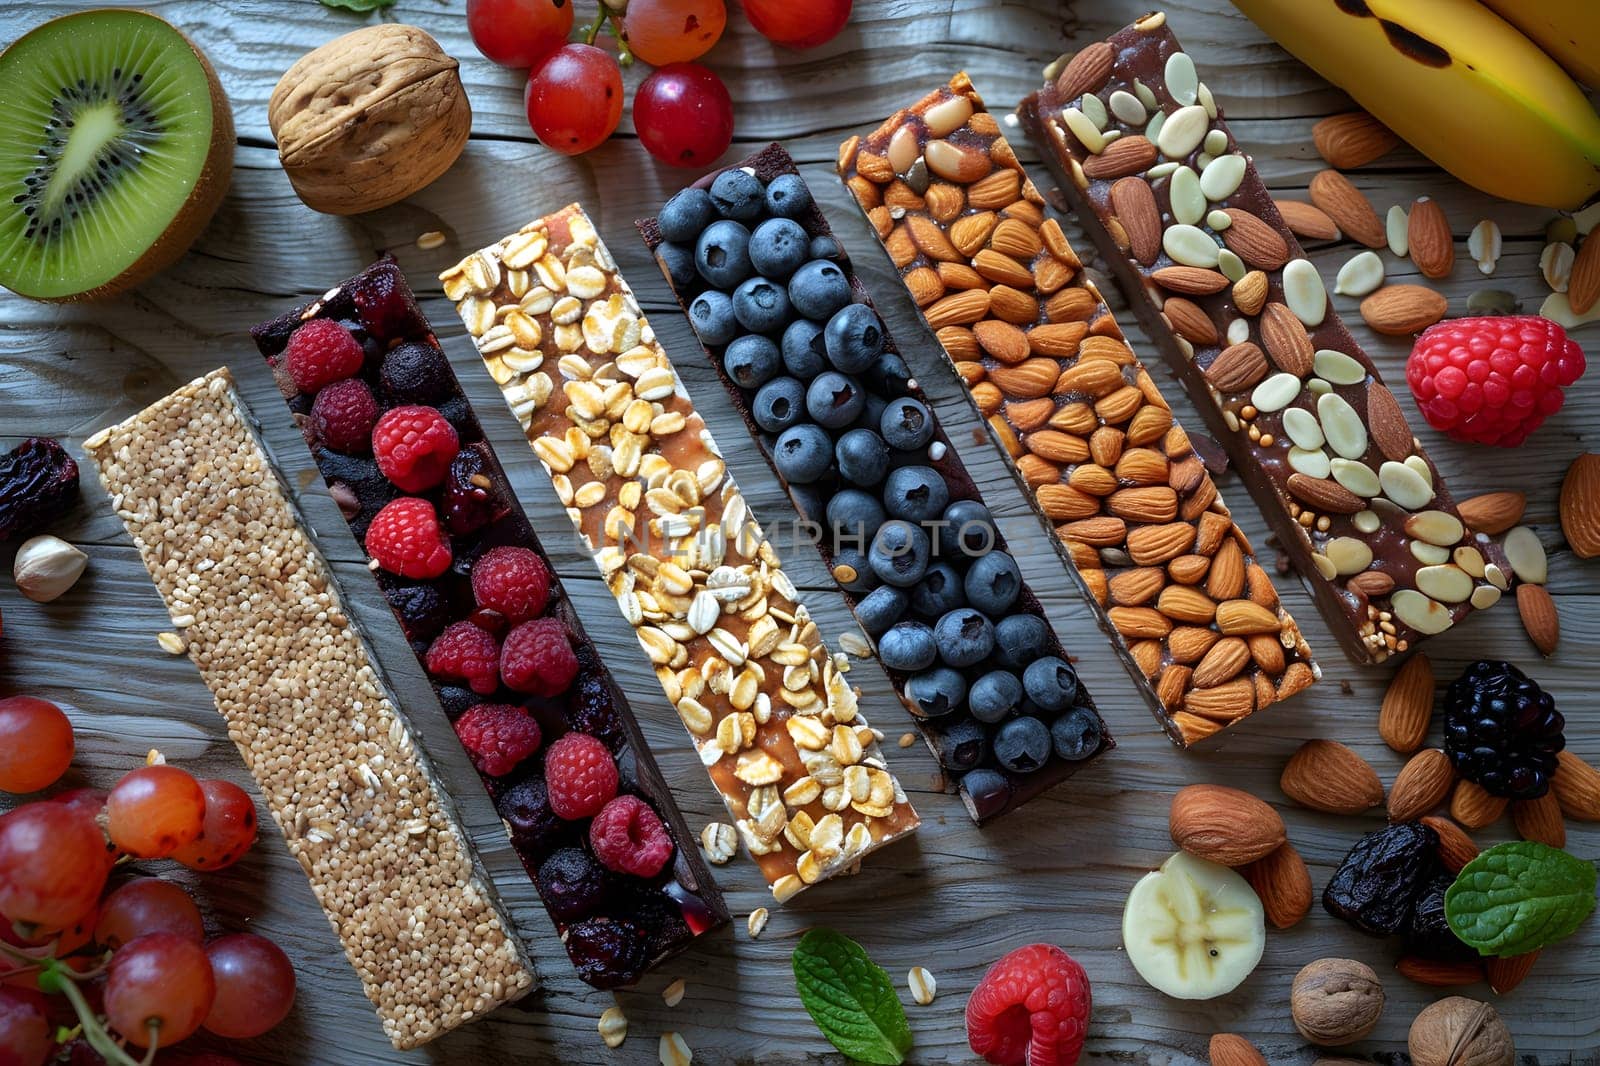 An assortment of granola bars made with a variety of fruits and nuts displayed on a rustic wooden table. Perfect for a nutritious snack or onthego meal